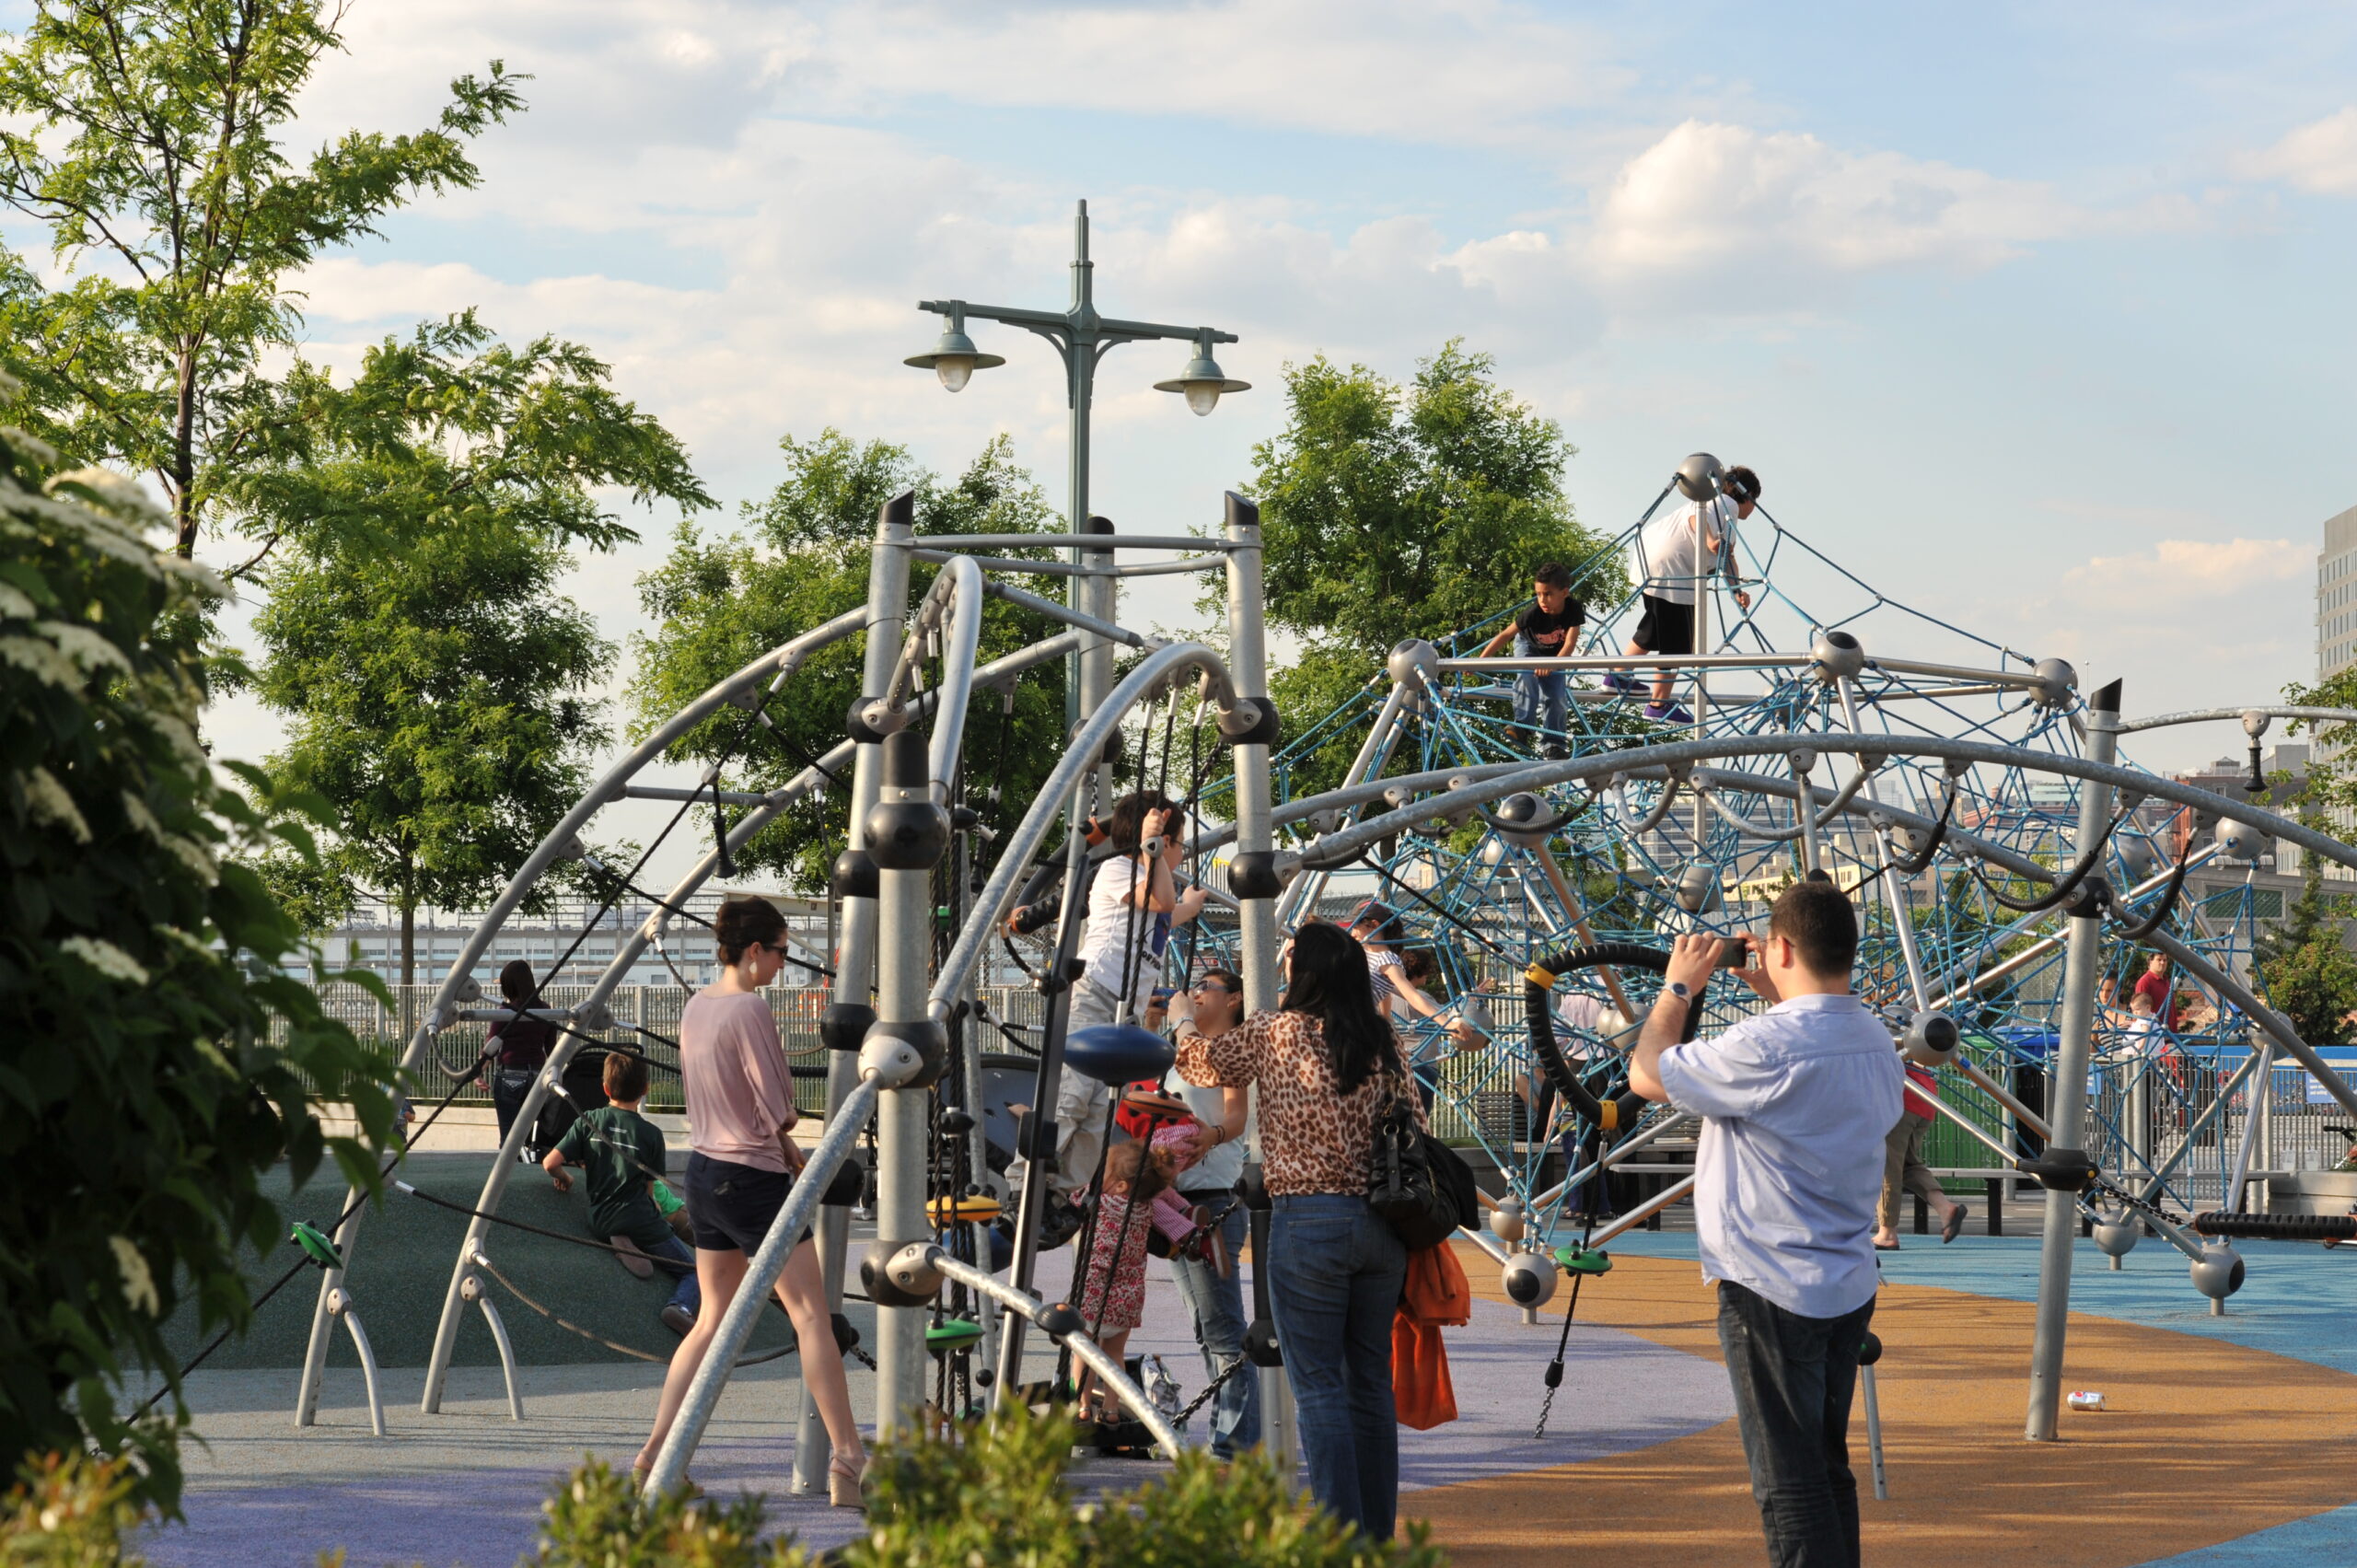 Children and their parents play on the jungle gym at Hudson River Park's Pier 25